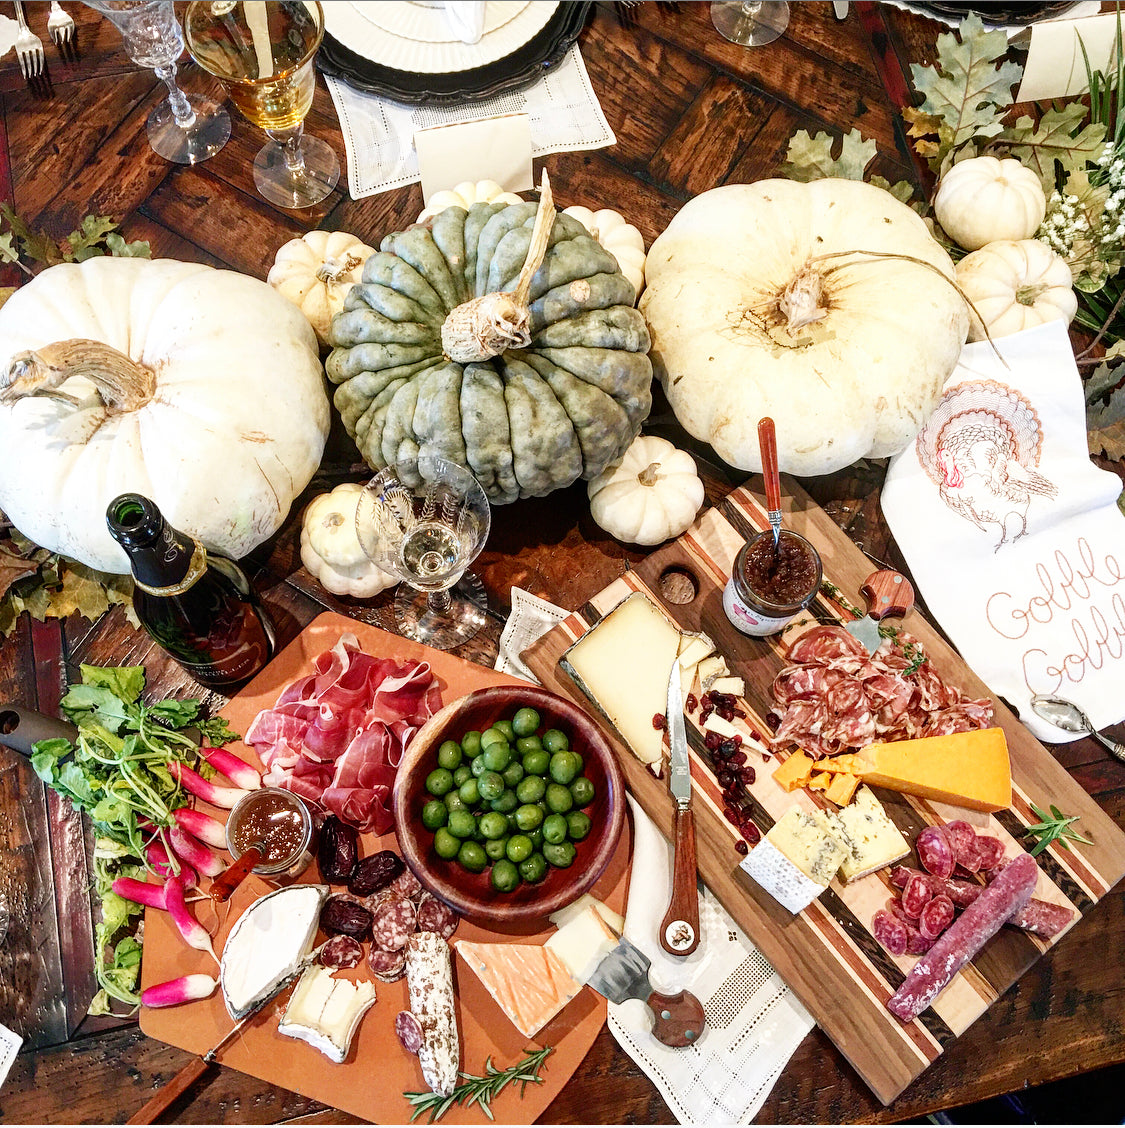 Picture of two cheese plates with wedges of cheese, meat, olives and pumpkins for festive thanksgiving